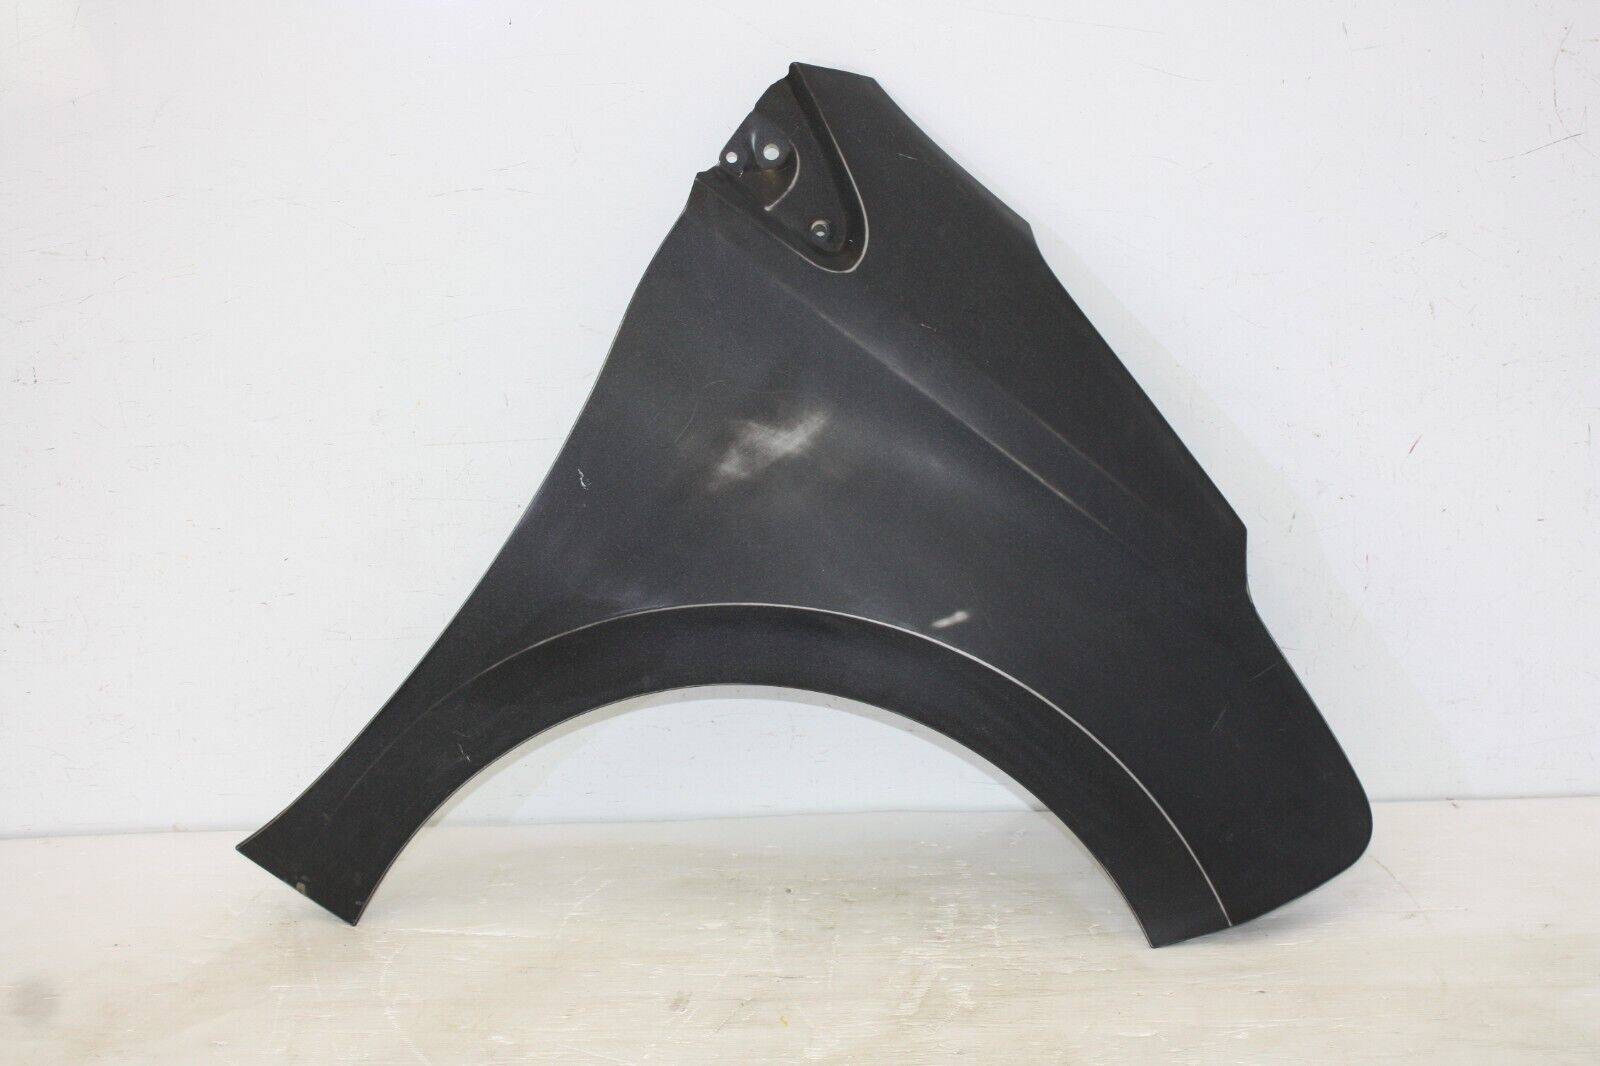 Peugeot 208 Front Right Side Wing 2015 TO 2020 802735685 AFTER MARKET 175578507665